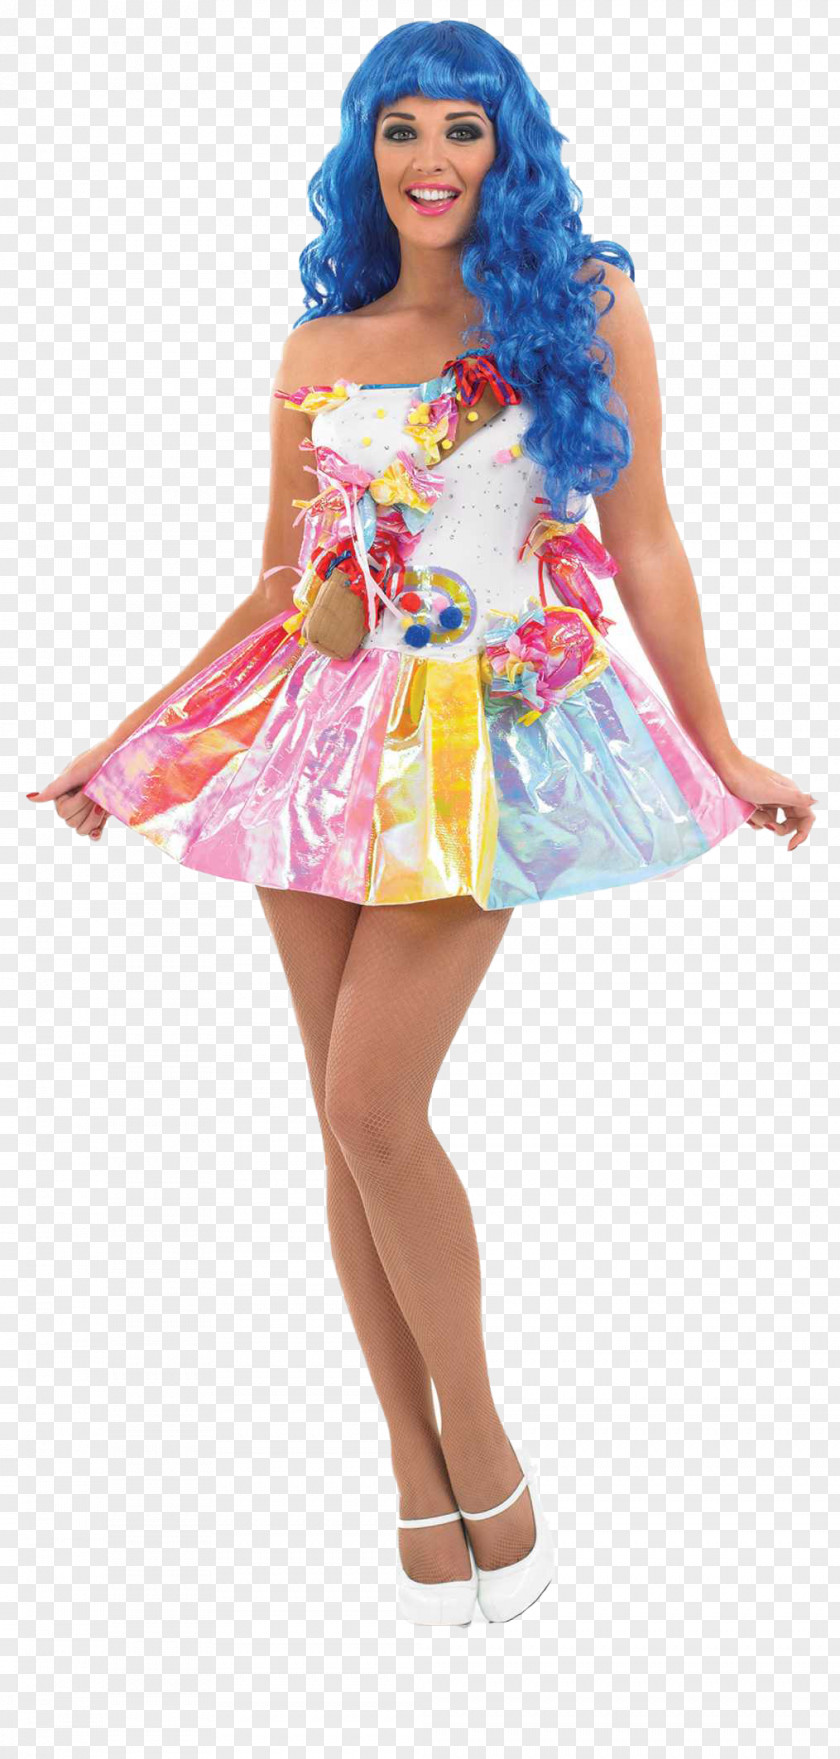 Katy Perry Popstar: Never Stop Stopping Costume Party Dress Wig PNG